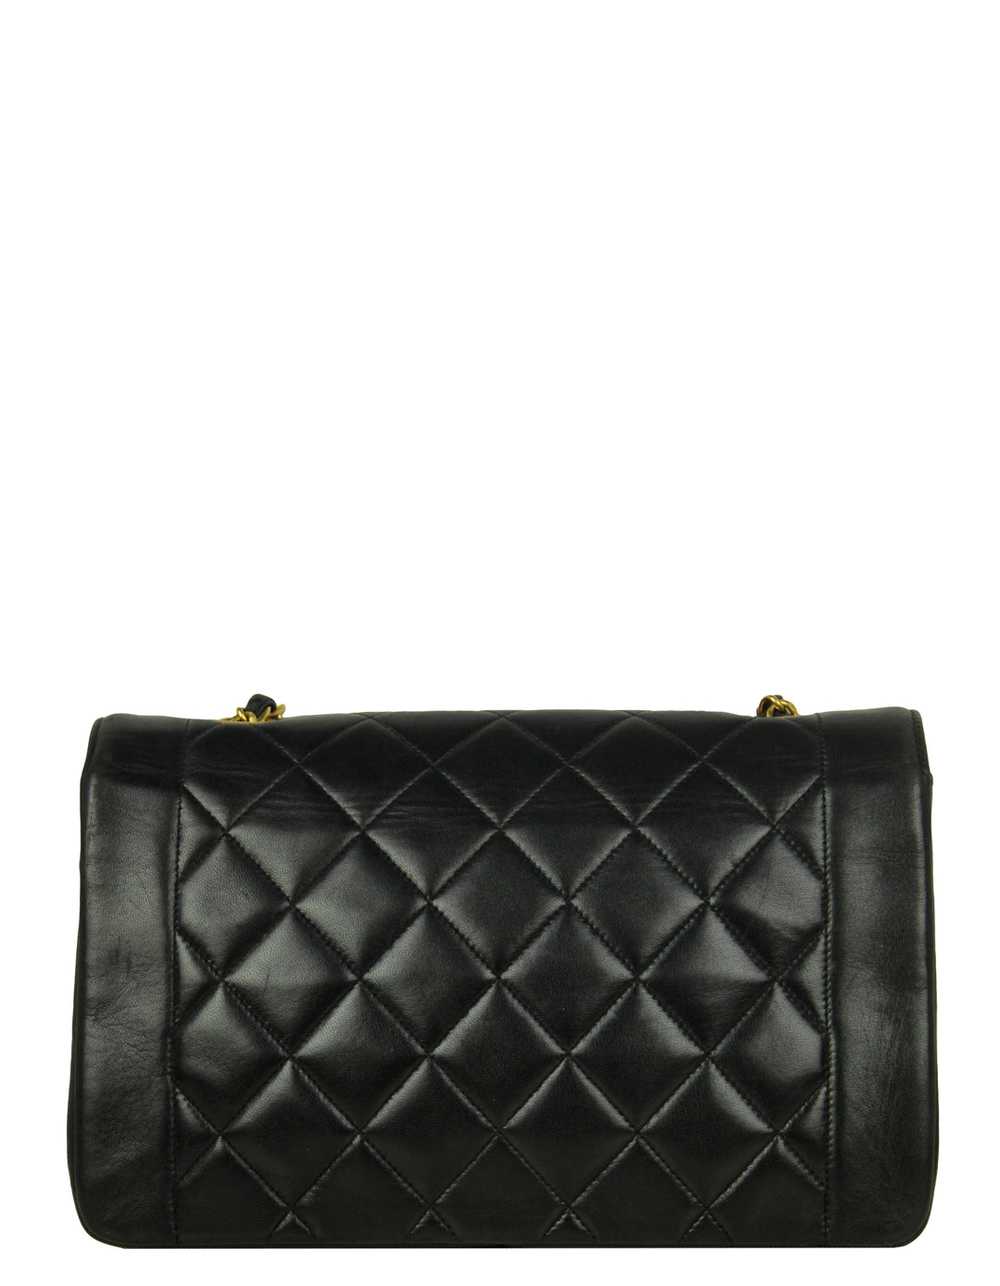 Chanel Black Lambskin Leather Quilted Medium Sing… - image 2